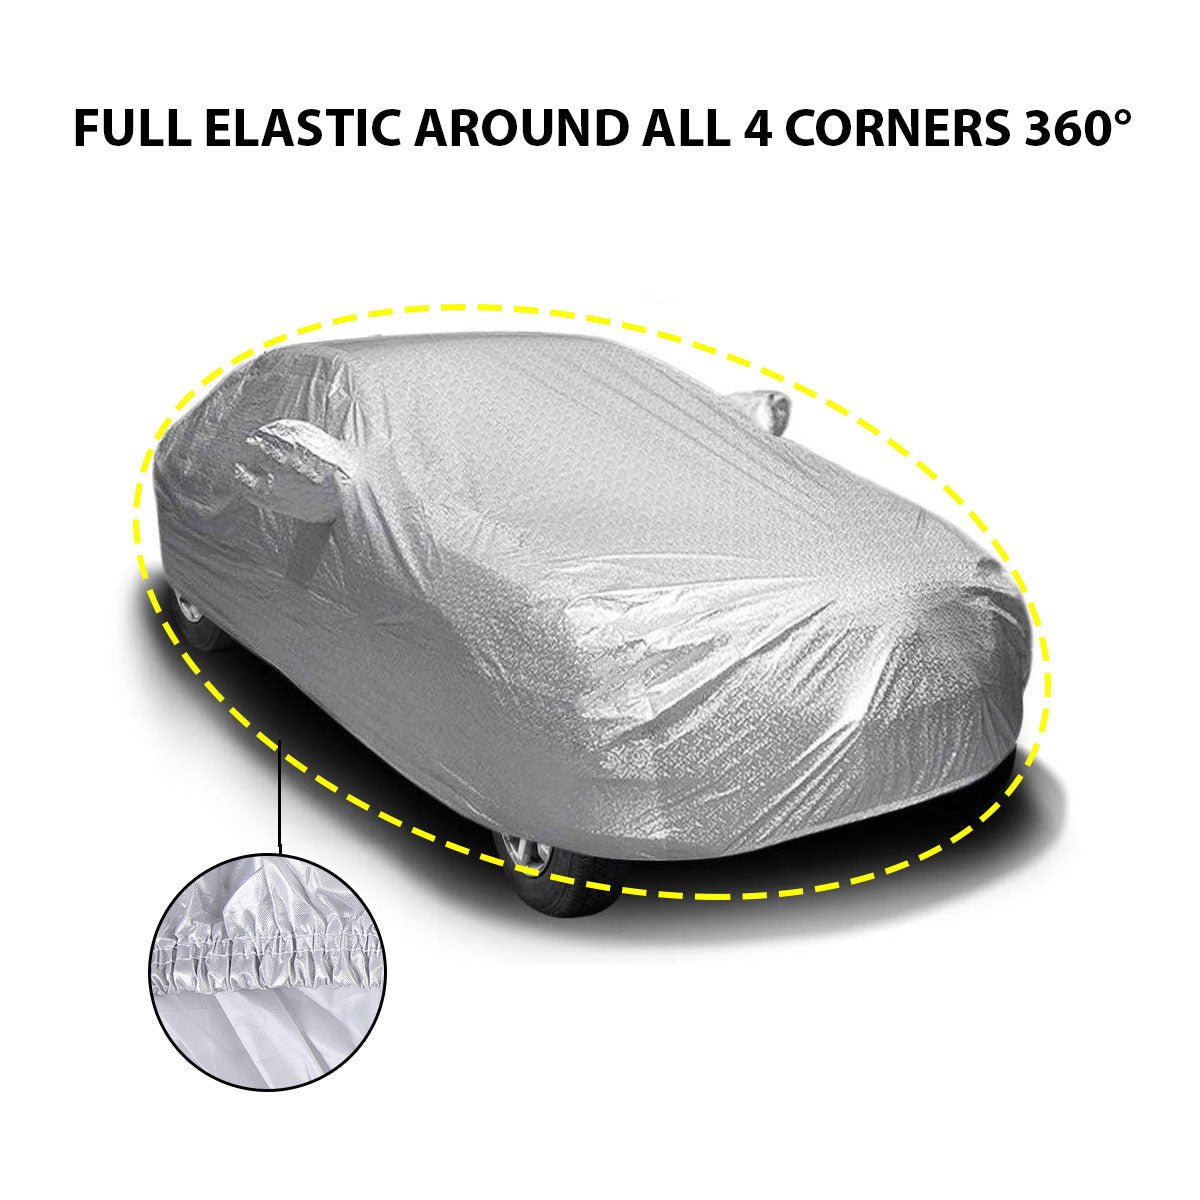 Oshotto Spyro Silver Anti Reflective, dustproof and Water Proof Car Body Cover with Mirror Pockets For Tata Sumo/Victa